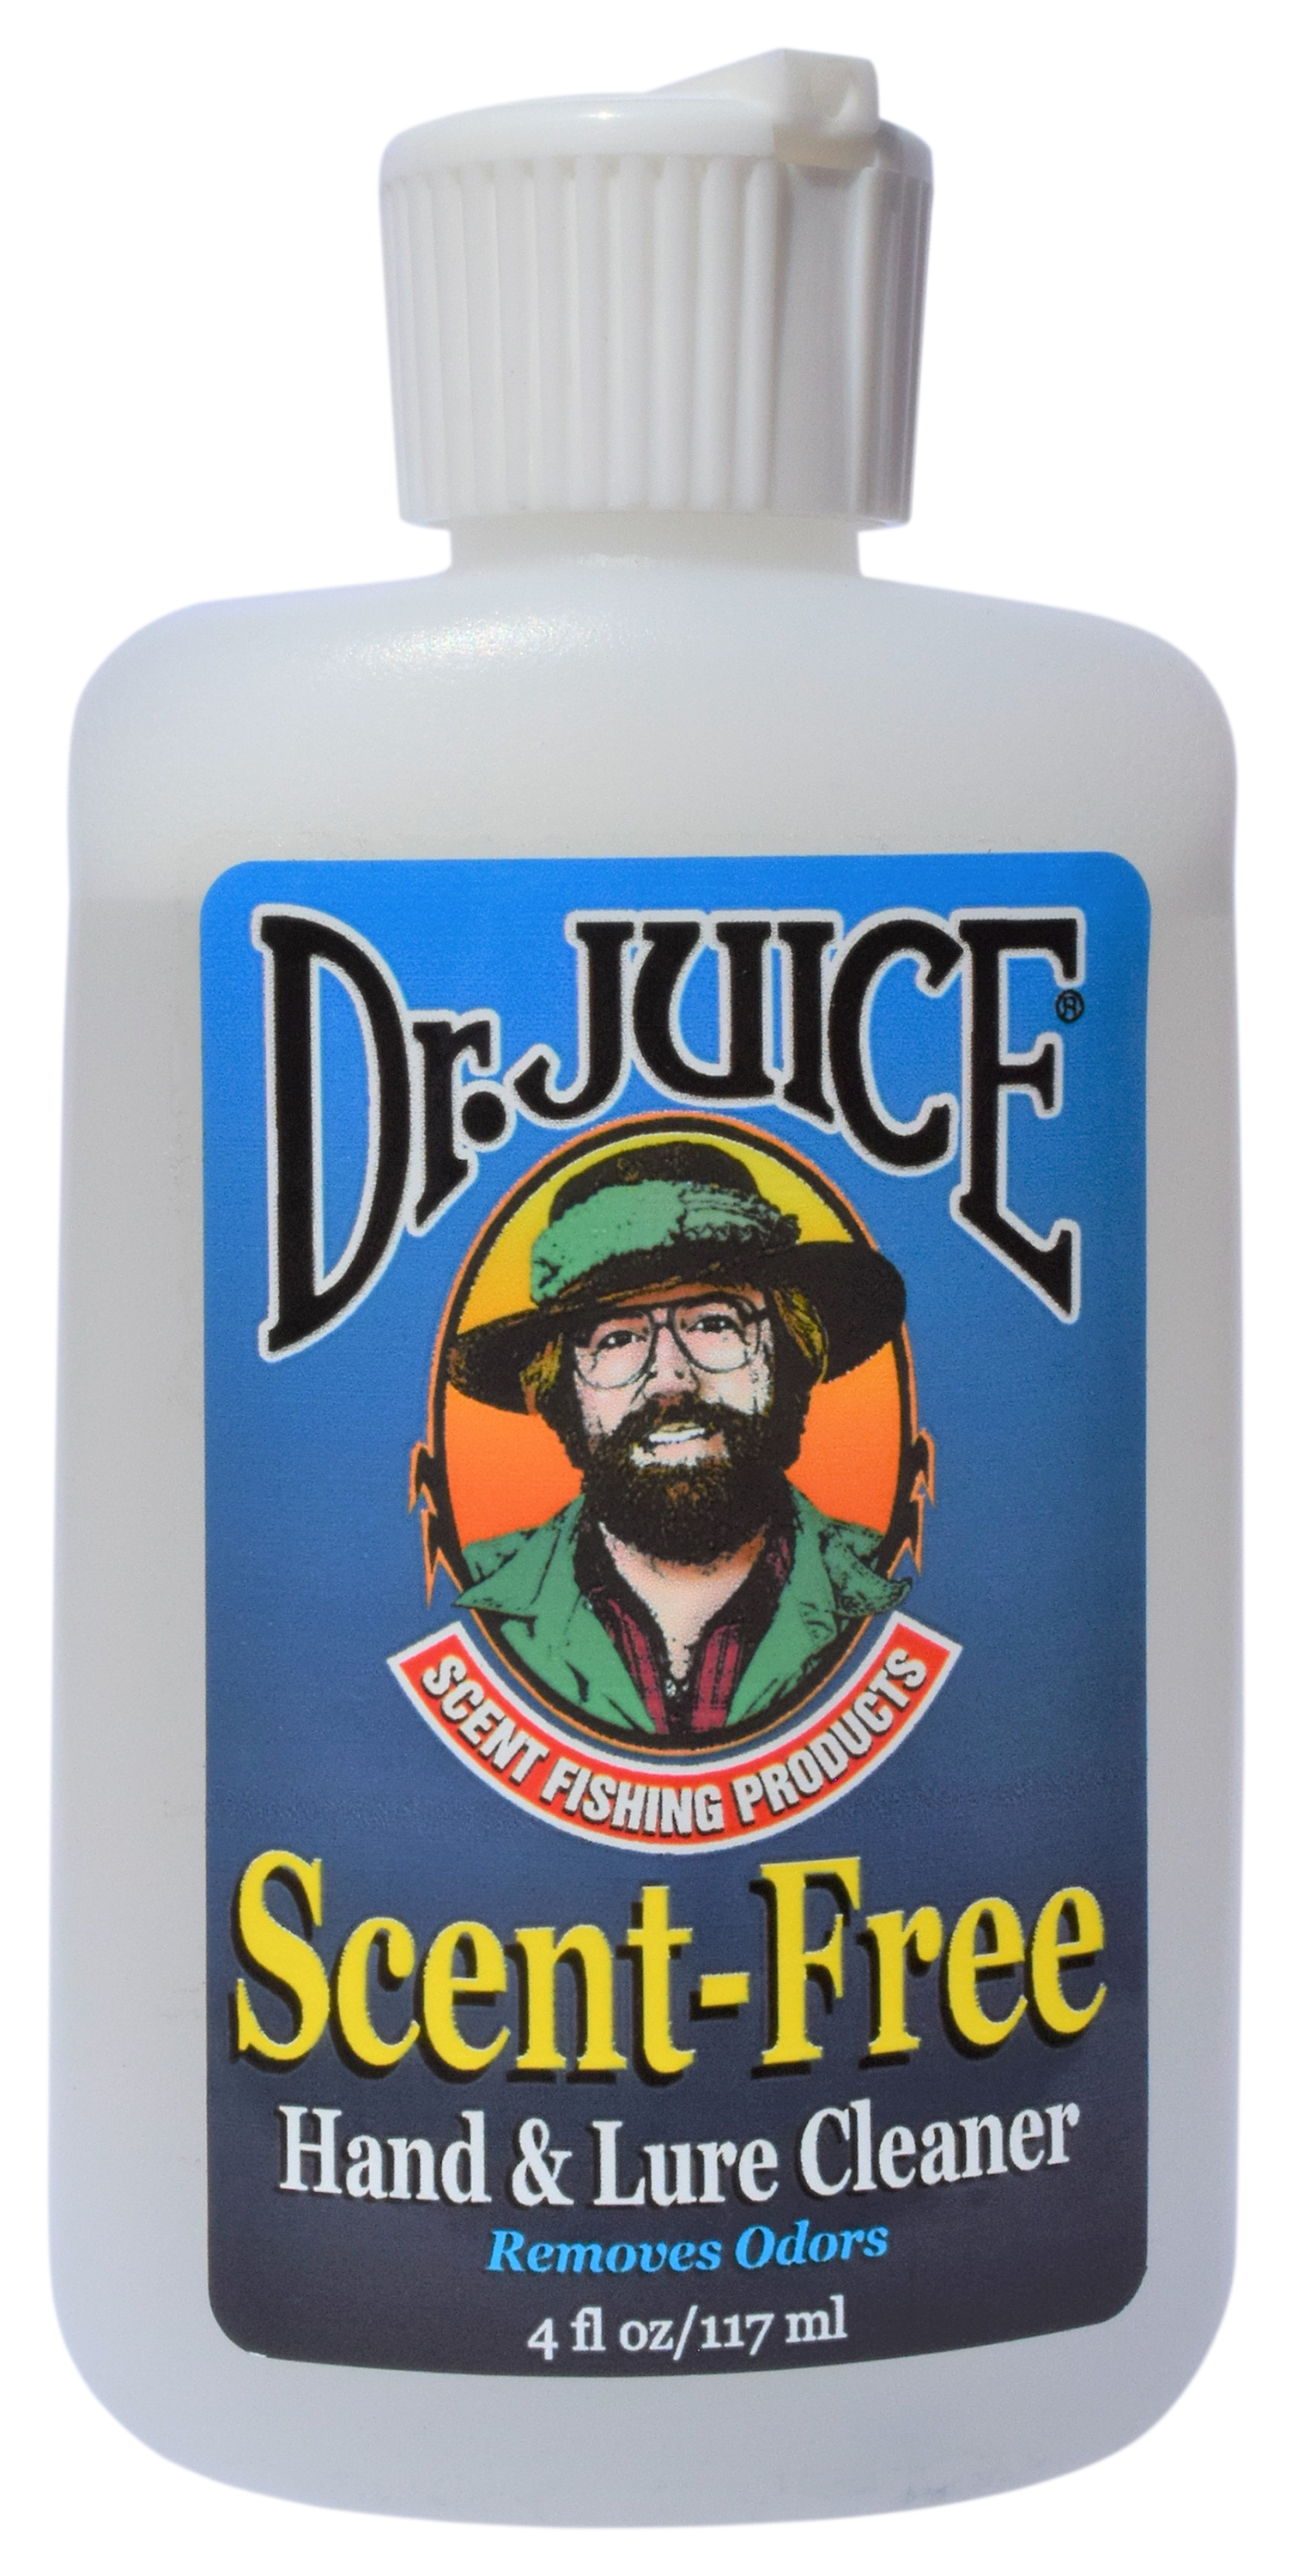 Dr. Juice Scent-Free Hand & Lure Cleaner